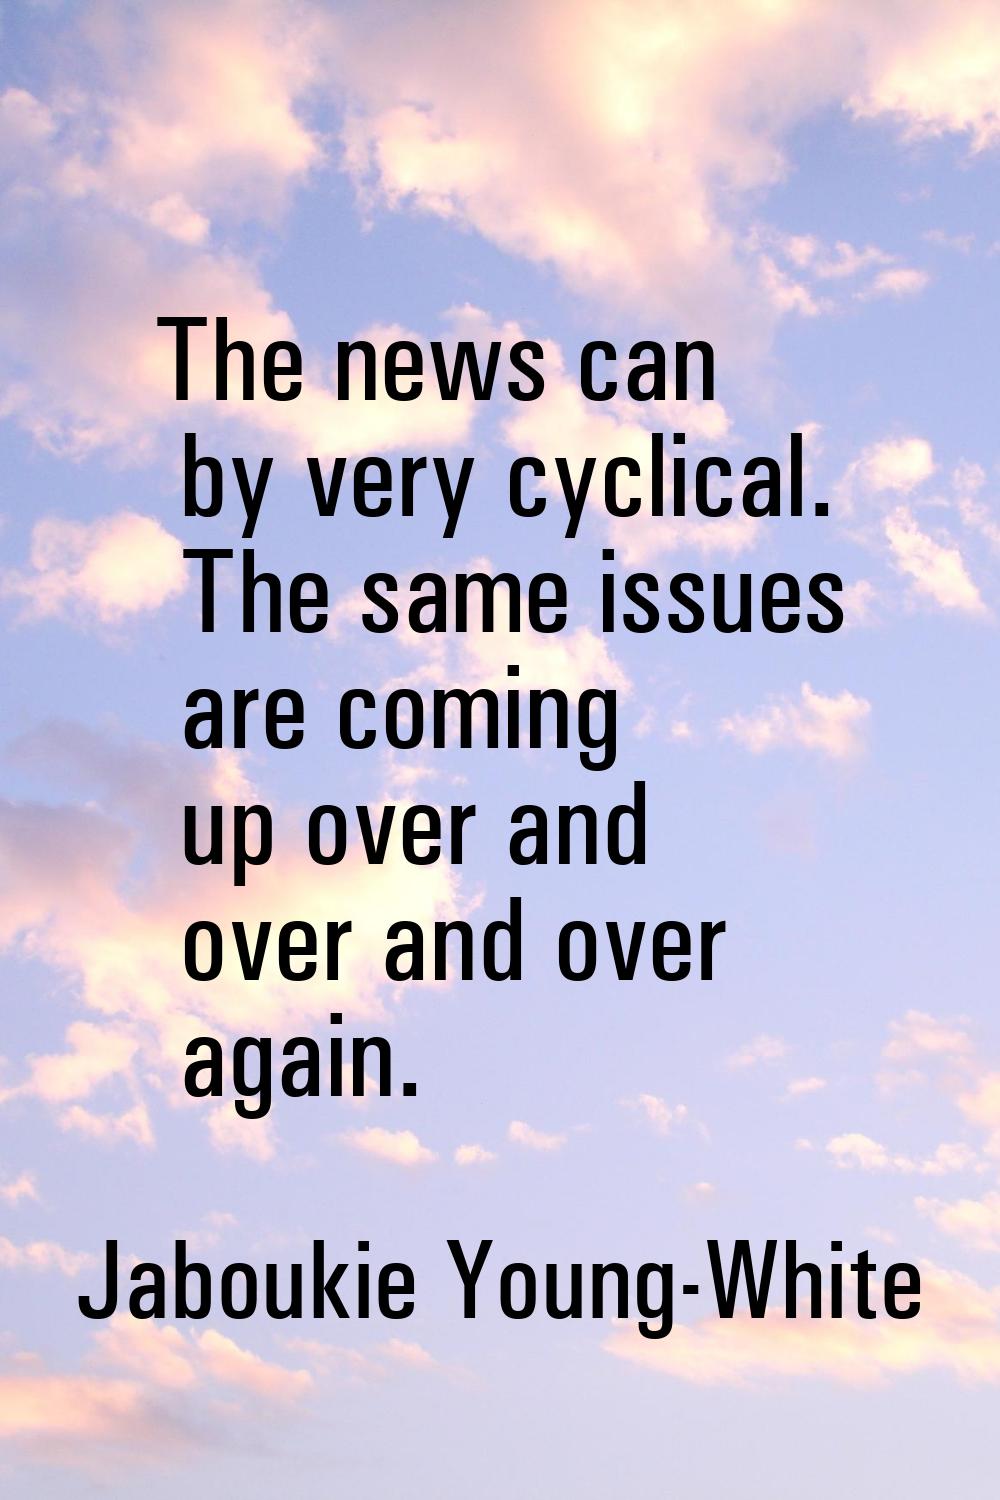 The news can by very cyclical. The same issues are coming up over and over and over again.